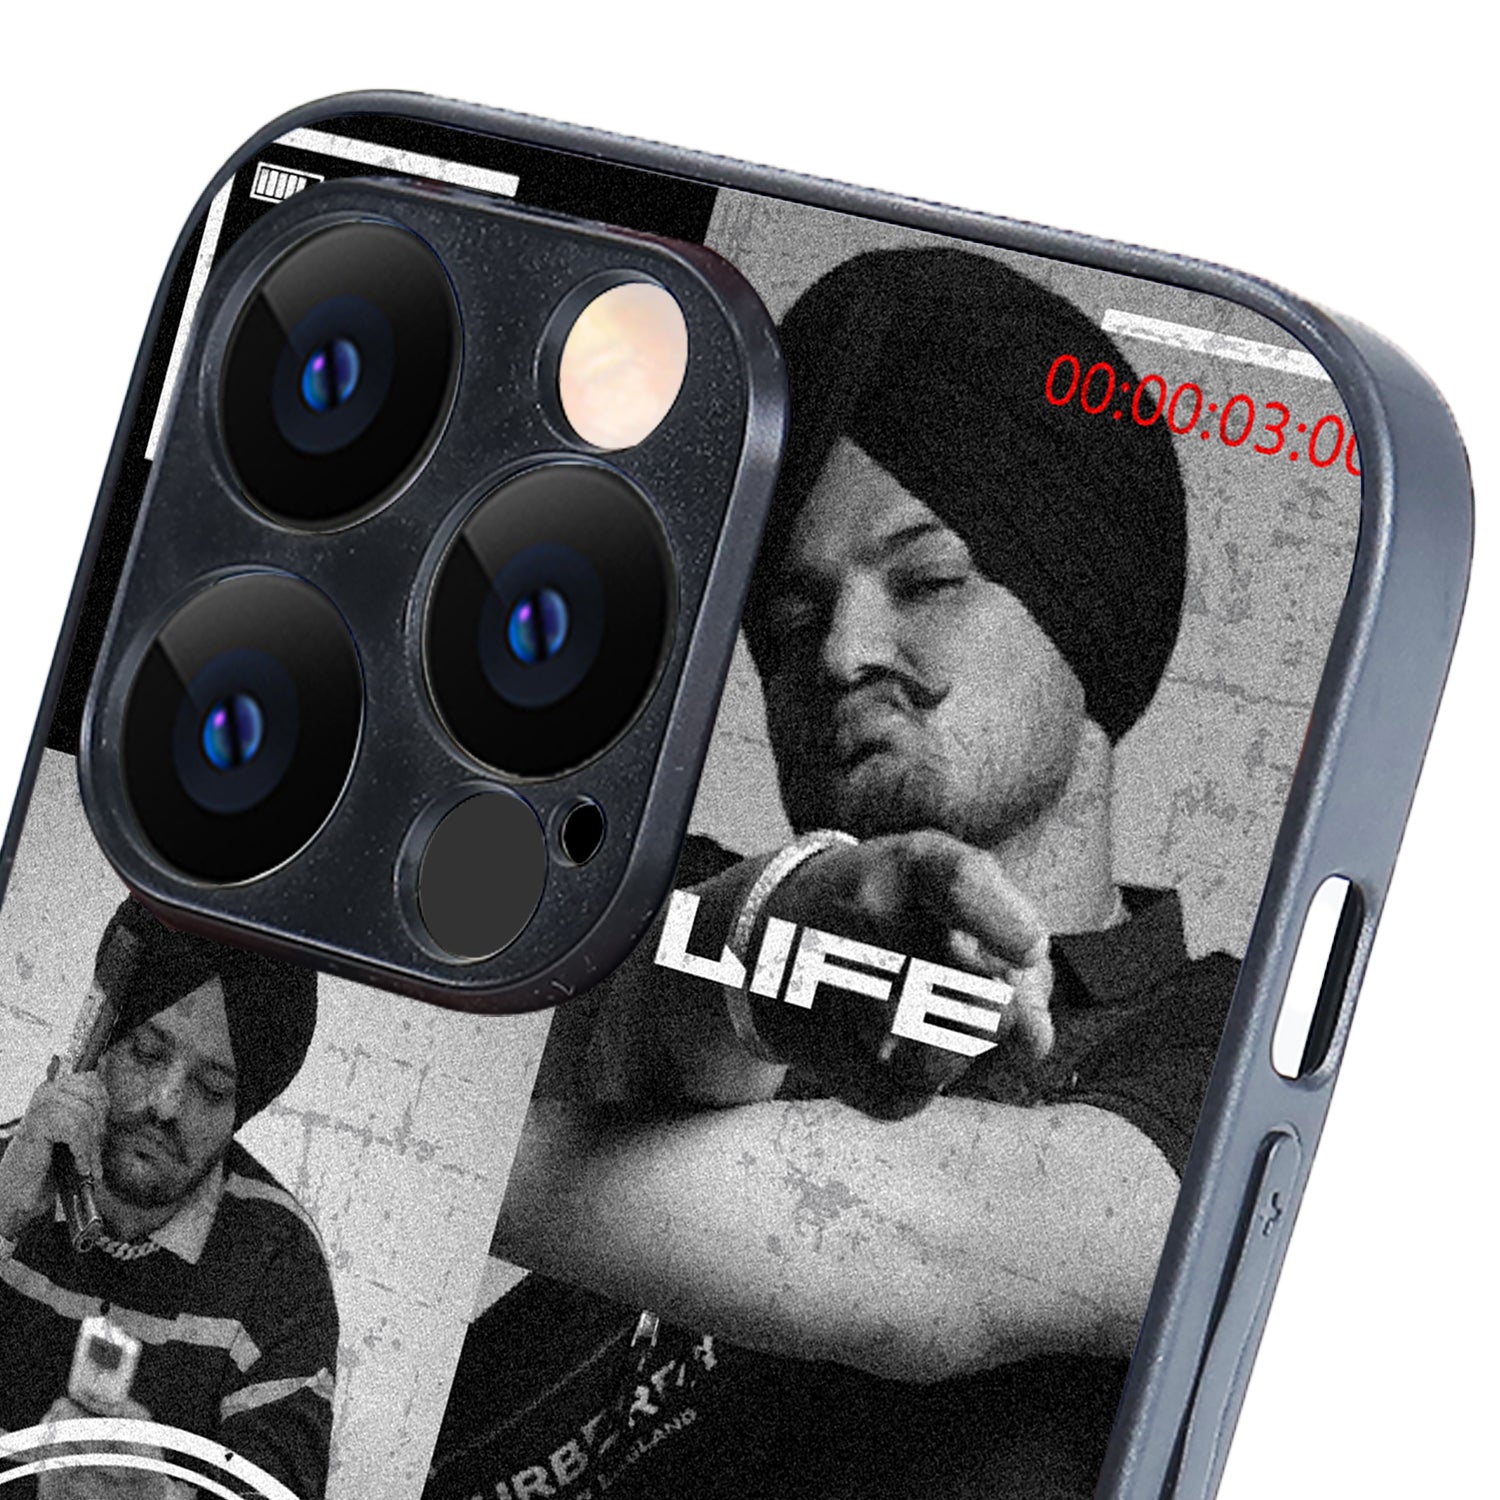 Legacy Lives Forever Sidhu Moosewala iPhone 14 Pro Max Case